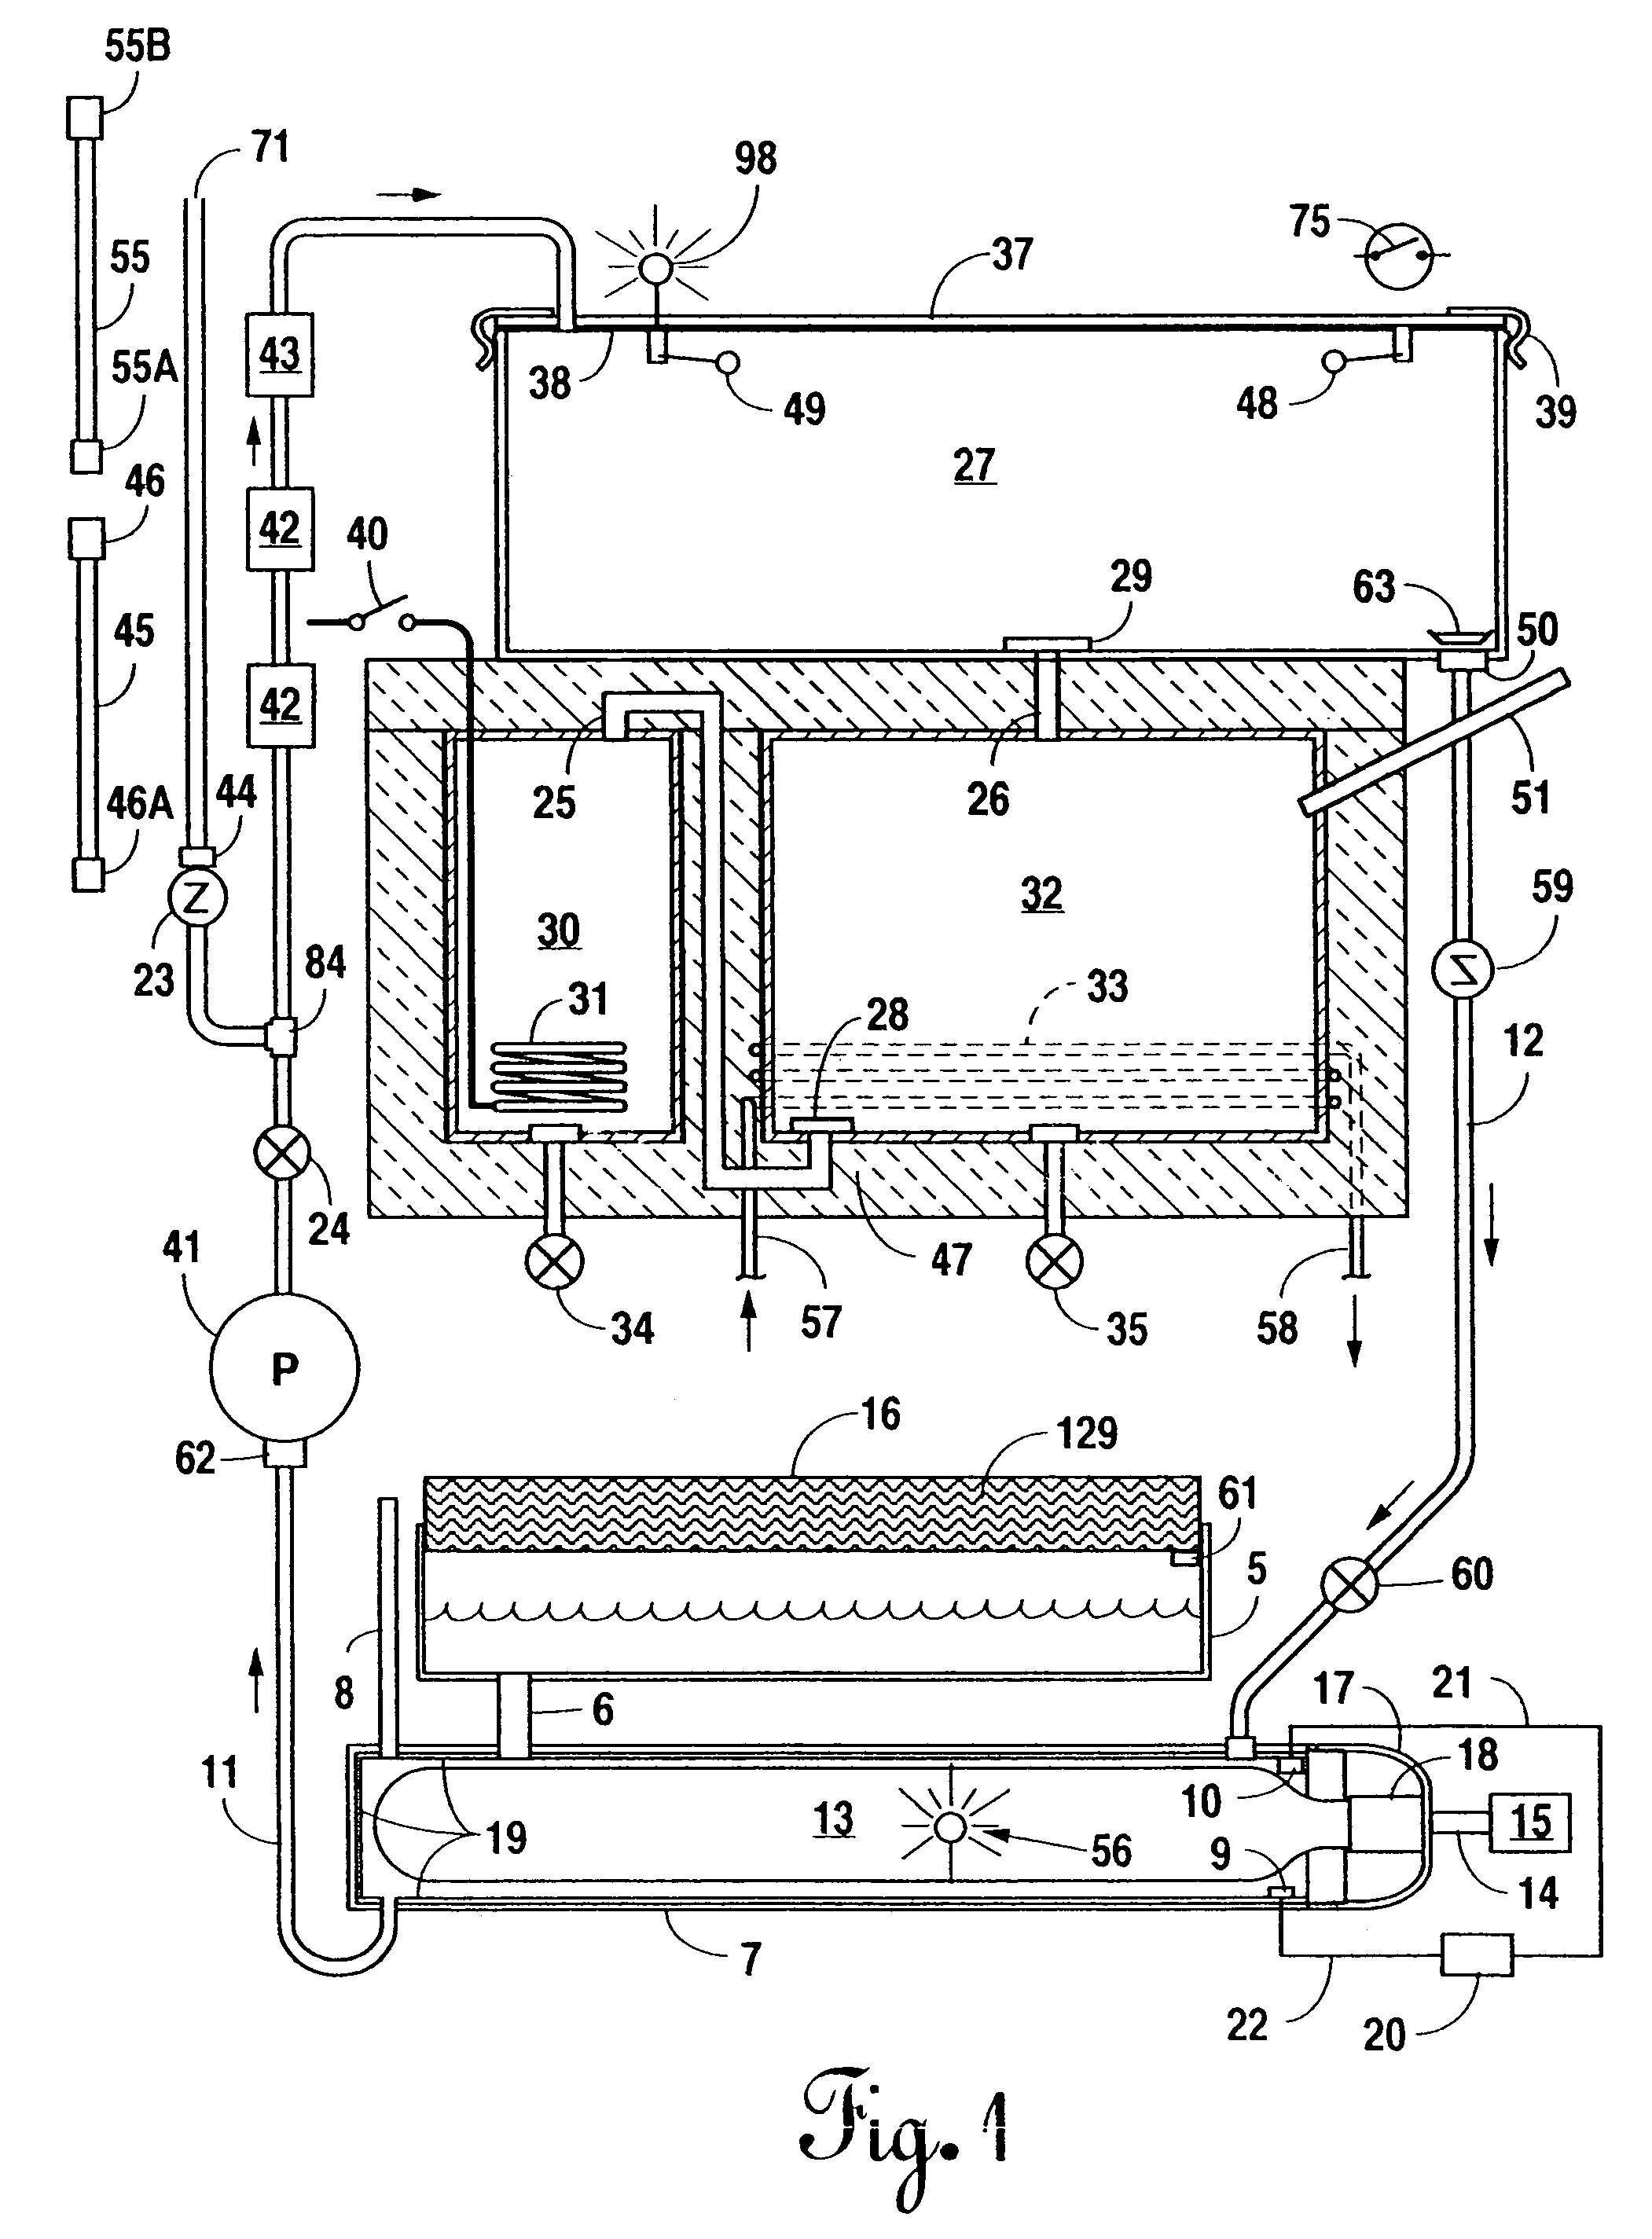 Portable, potable water recovery and dispensing apparatus